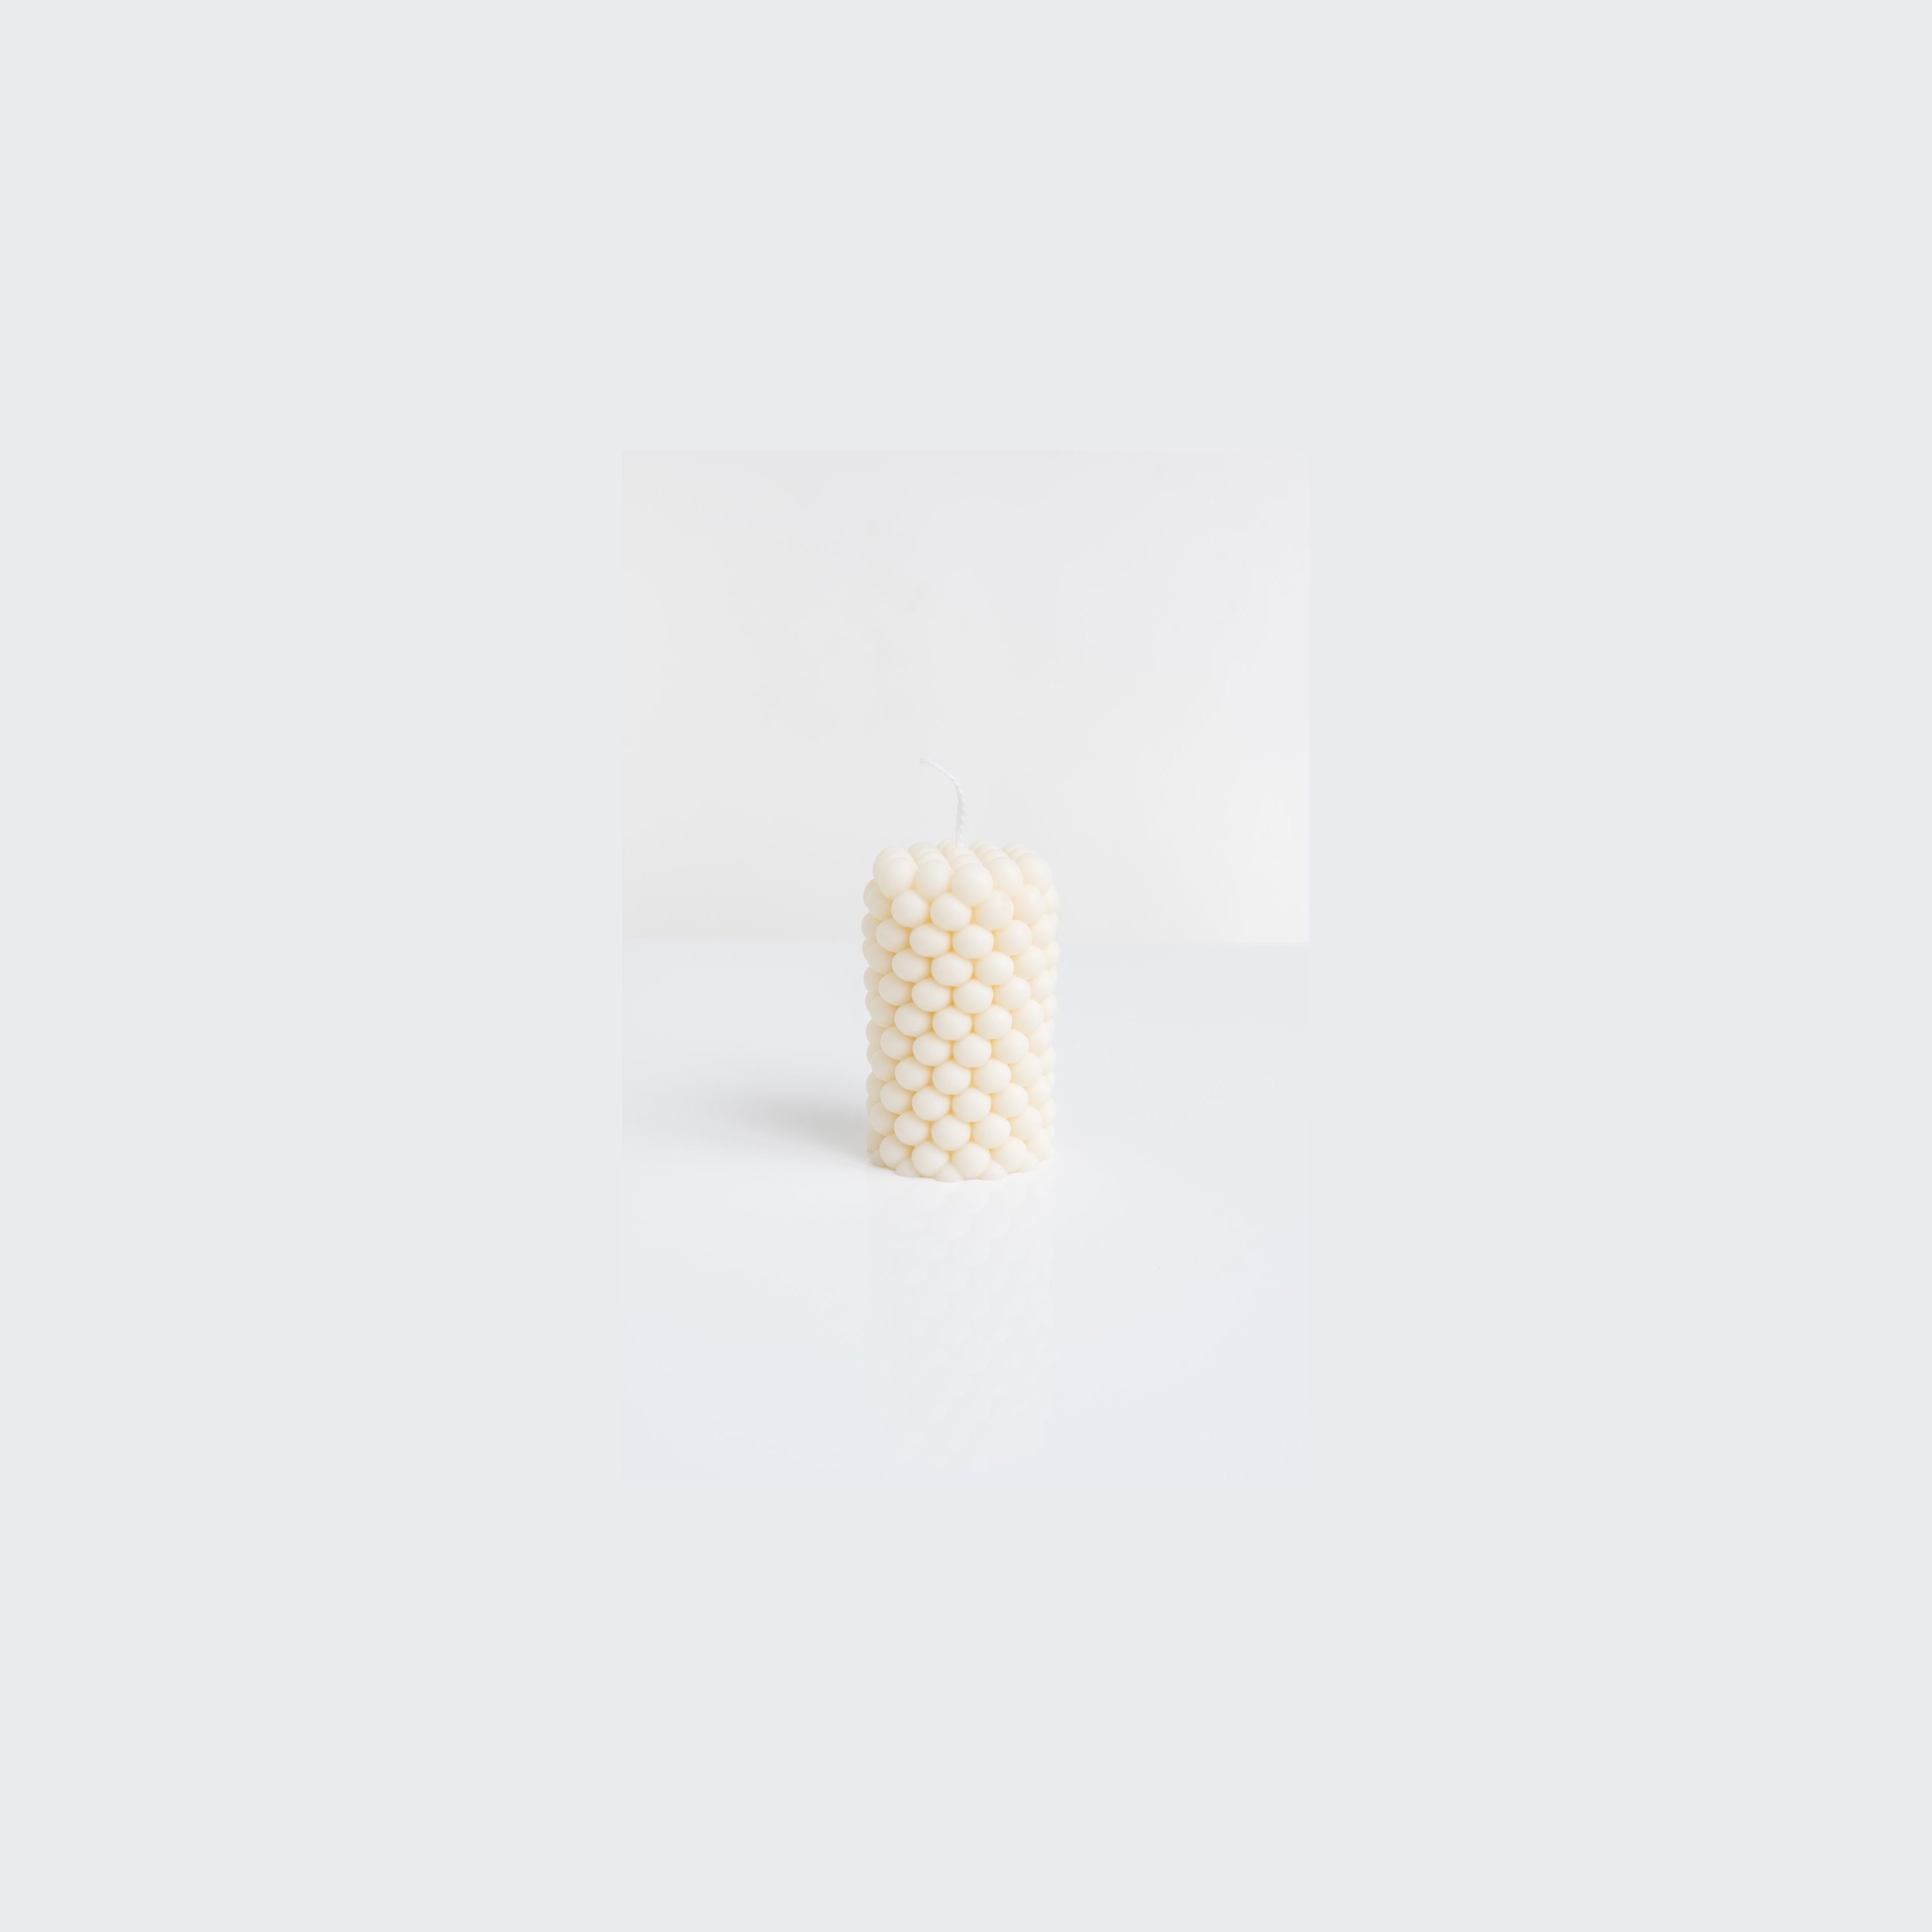 Fall/Winter Collection Shape Candles - White